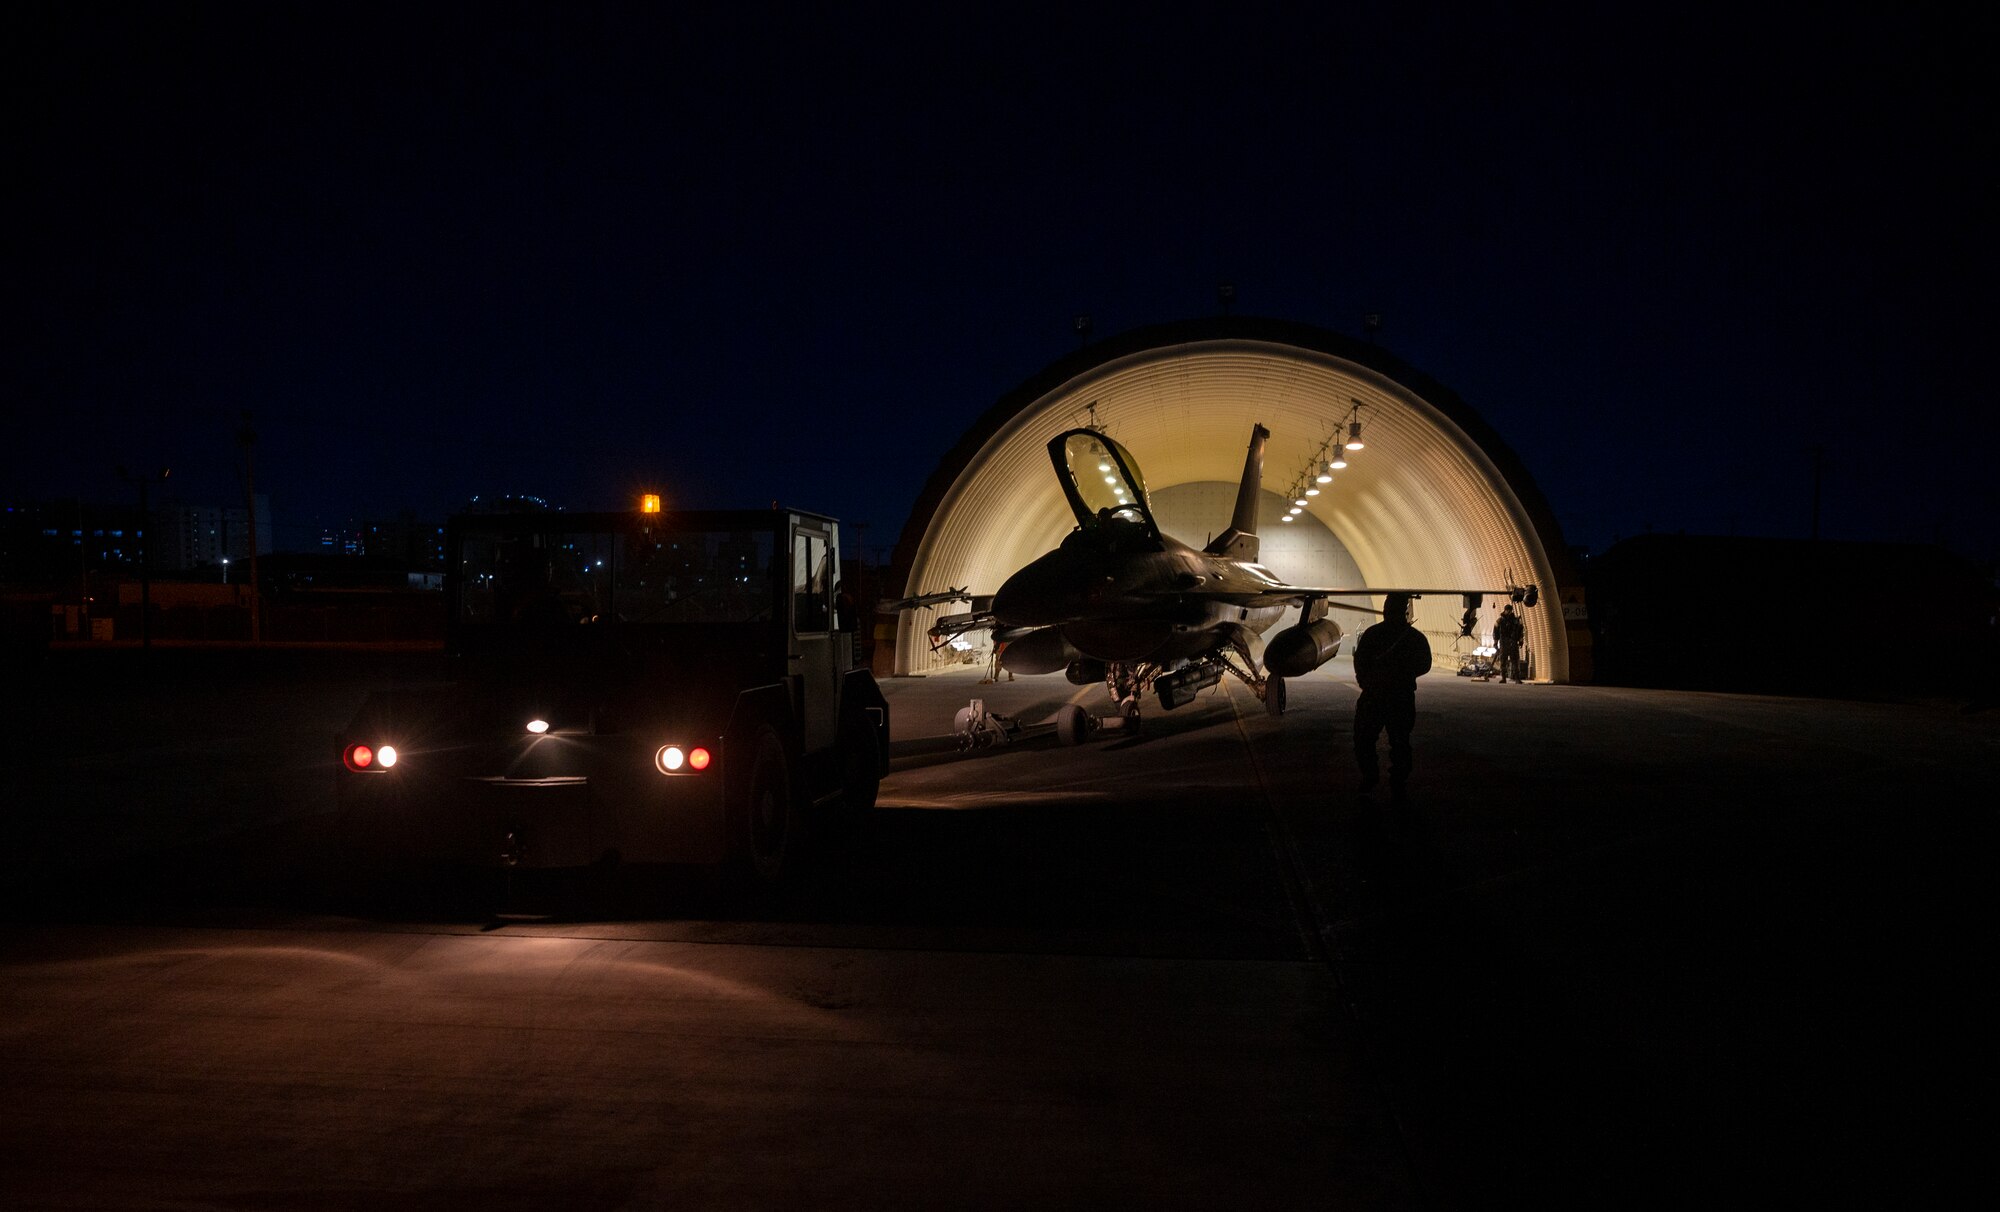 U.S. Air Force Airmen from the 51st Fighter Wing transport an F-16 Fighting Falcon to a hangar during a training event at Daegu Air Base, Republic of Korea, Feb. 1, 2023.